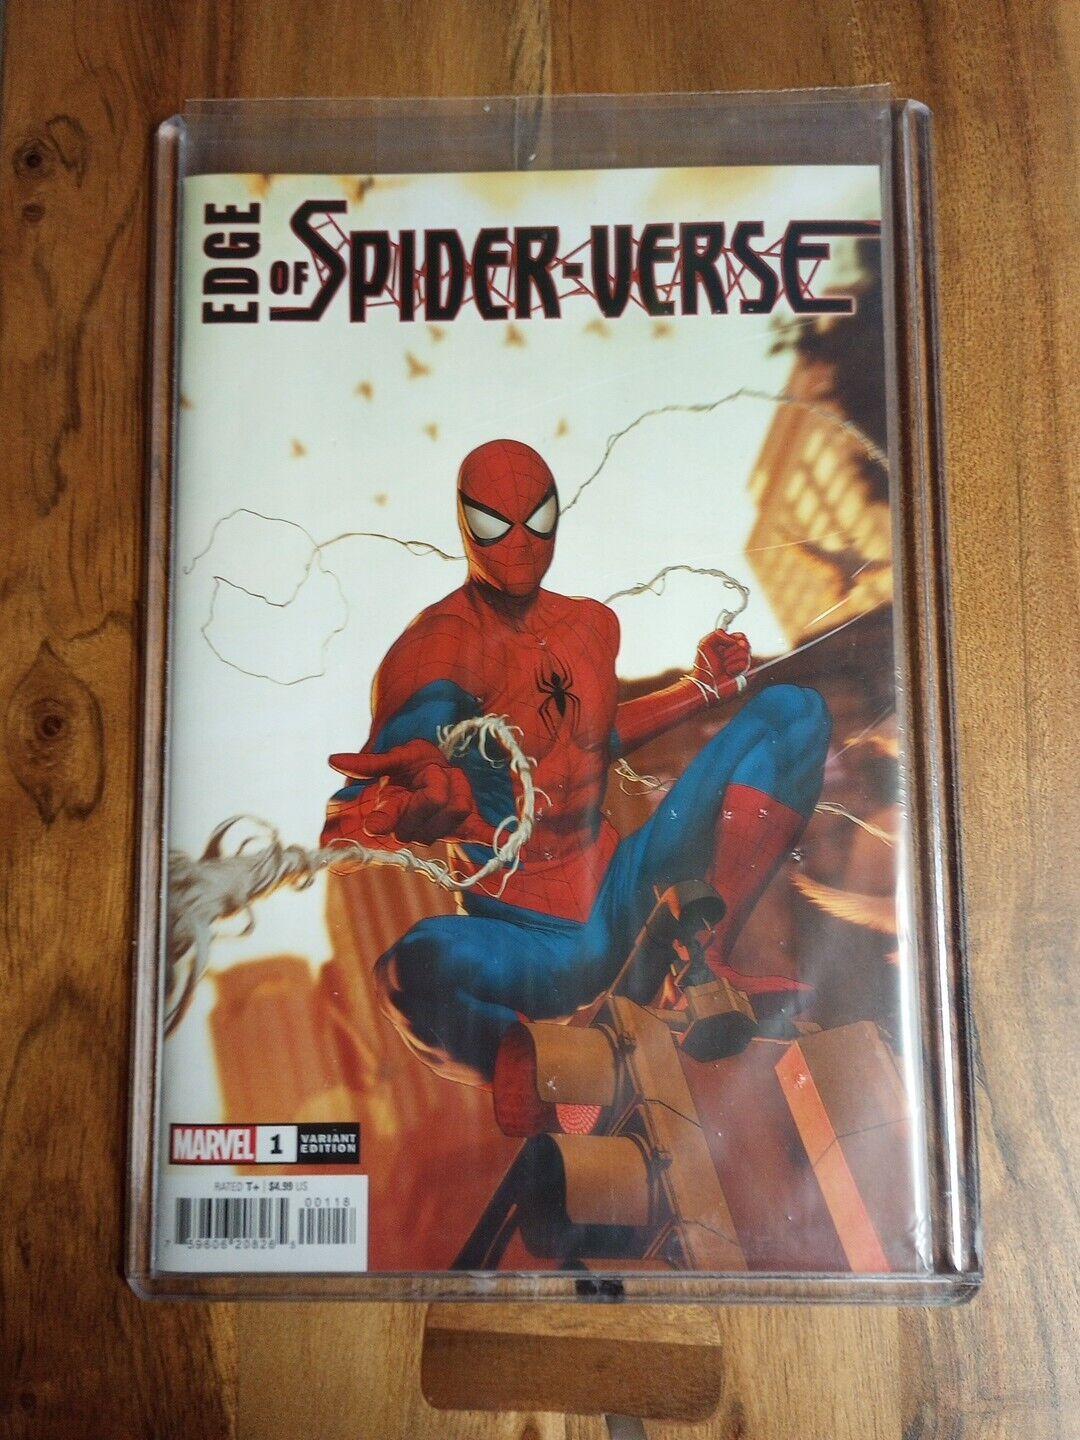 Edge Of Spider-verse #1 One Per Store Variant Sealed With Hard Case